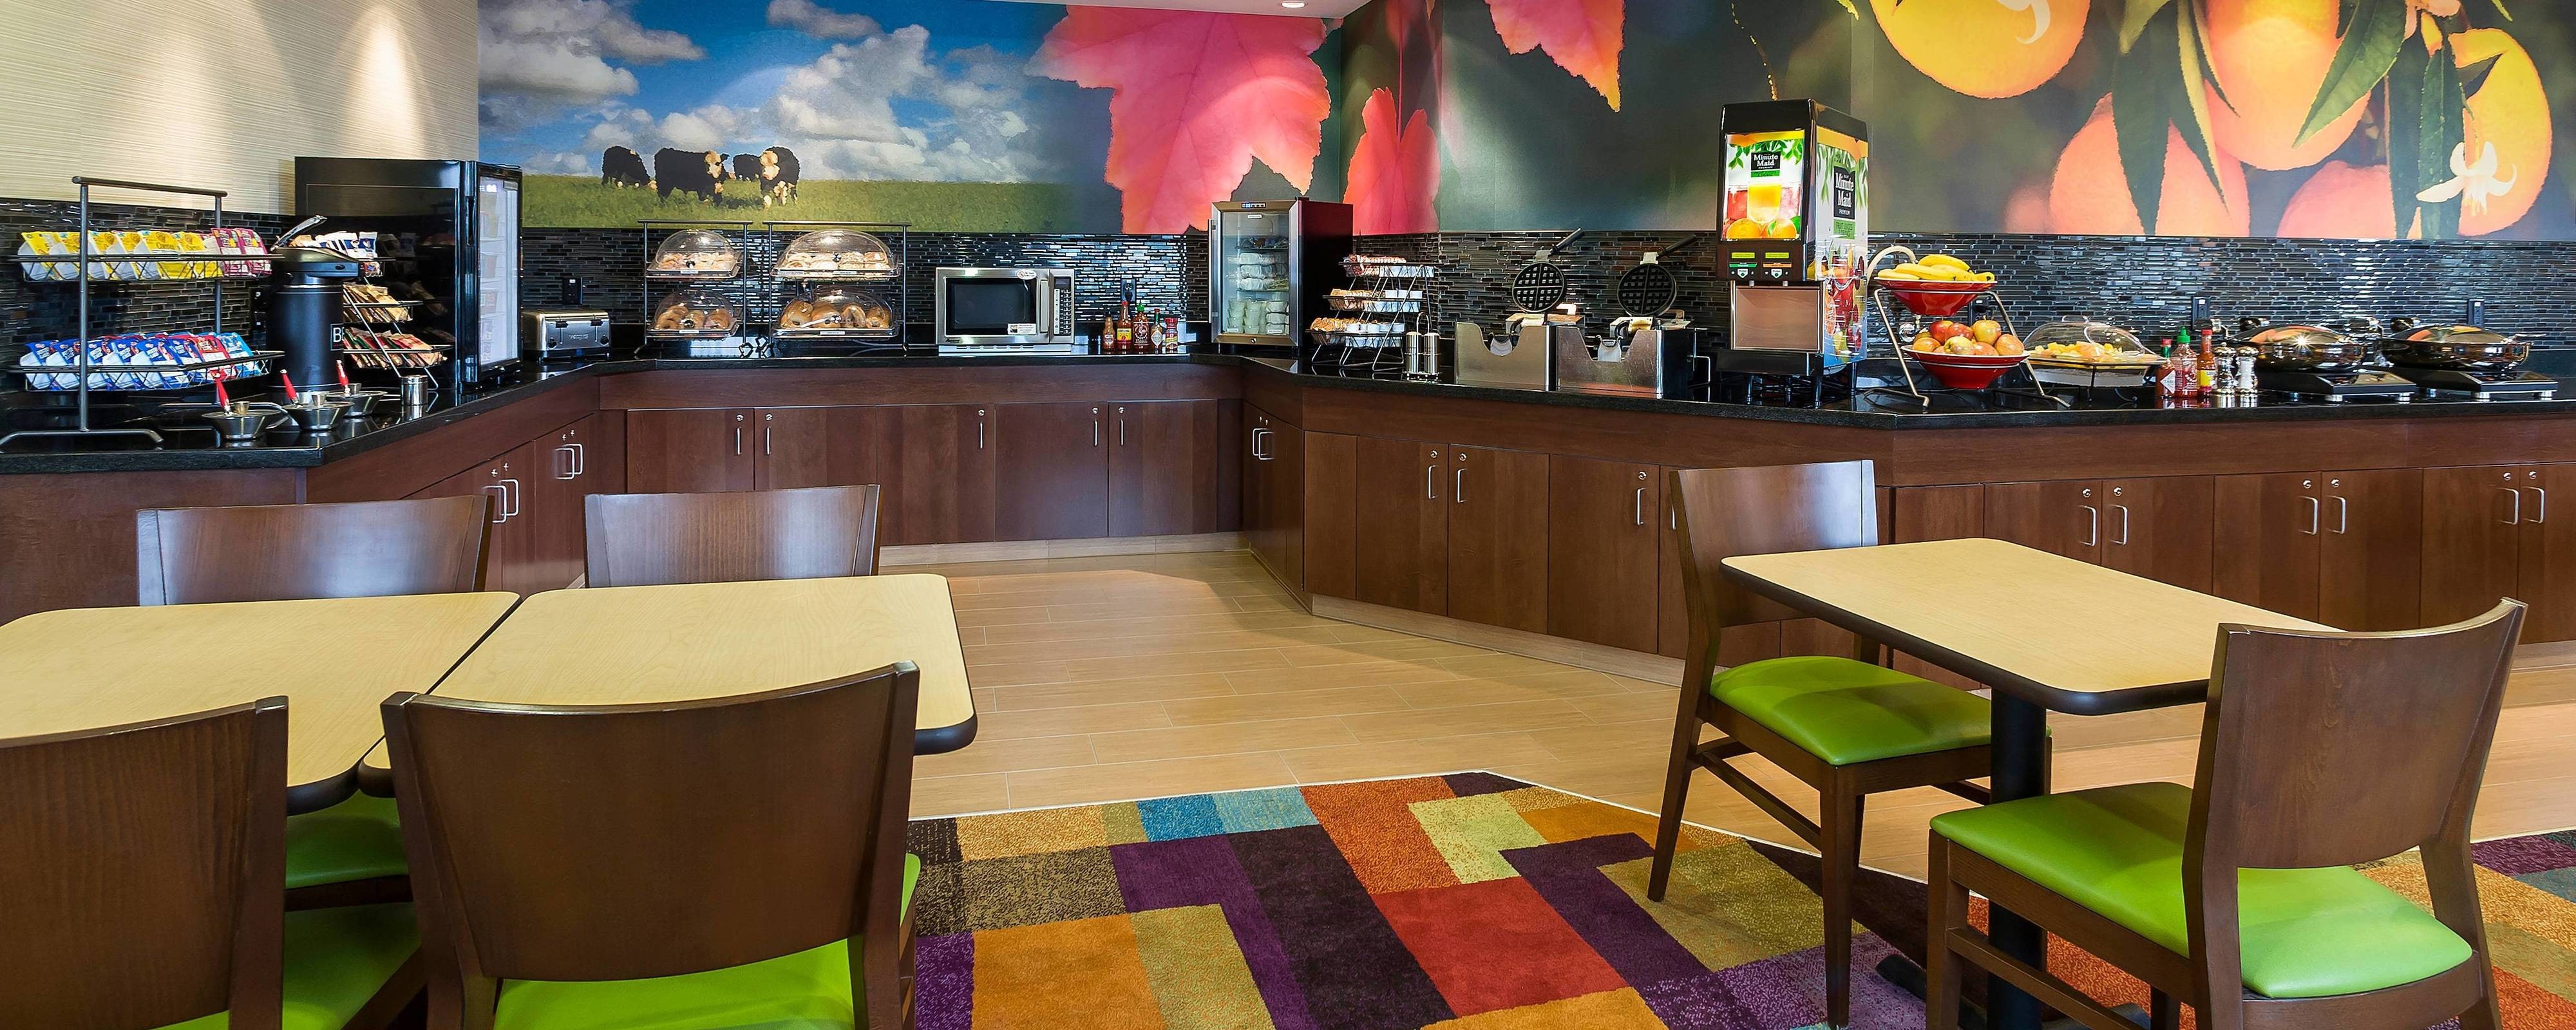 Places To Eat In Findlay Oh Fairfield Inn Suites Findlay Oh